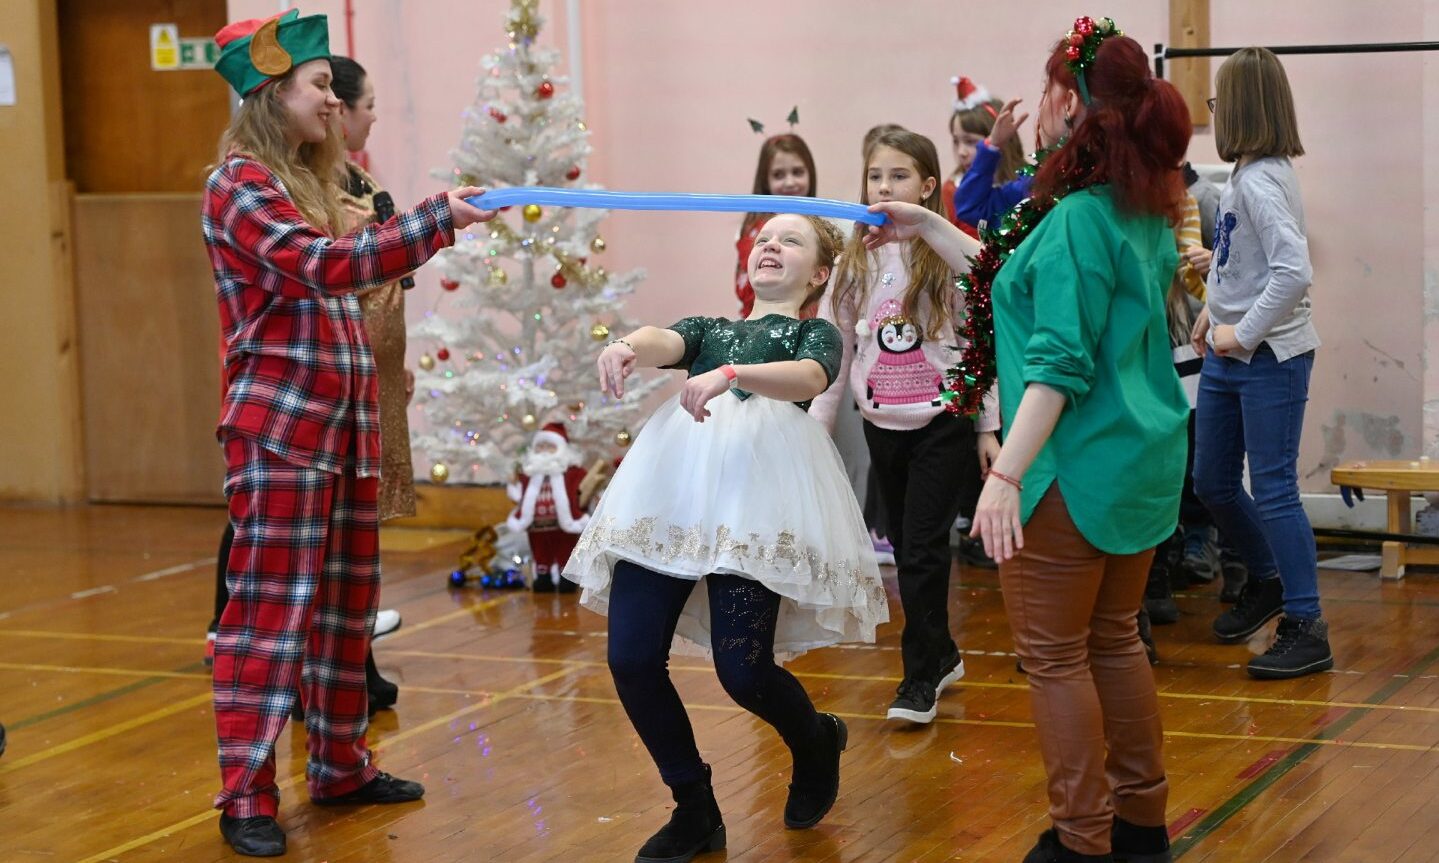 Ukrainian children and their families had fun with a Christmas party at Rosemount Community Centre